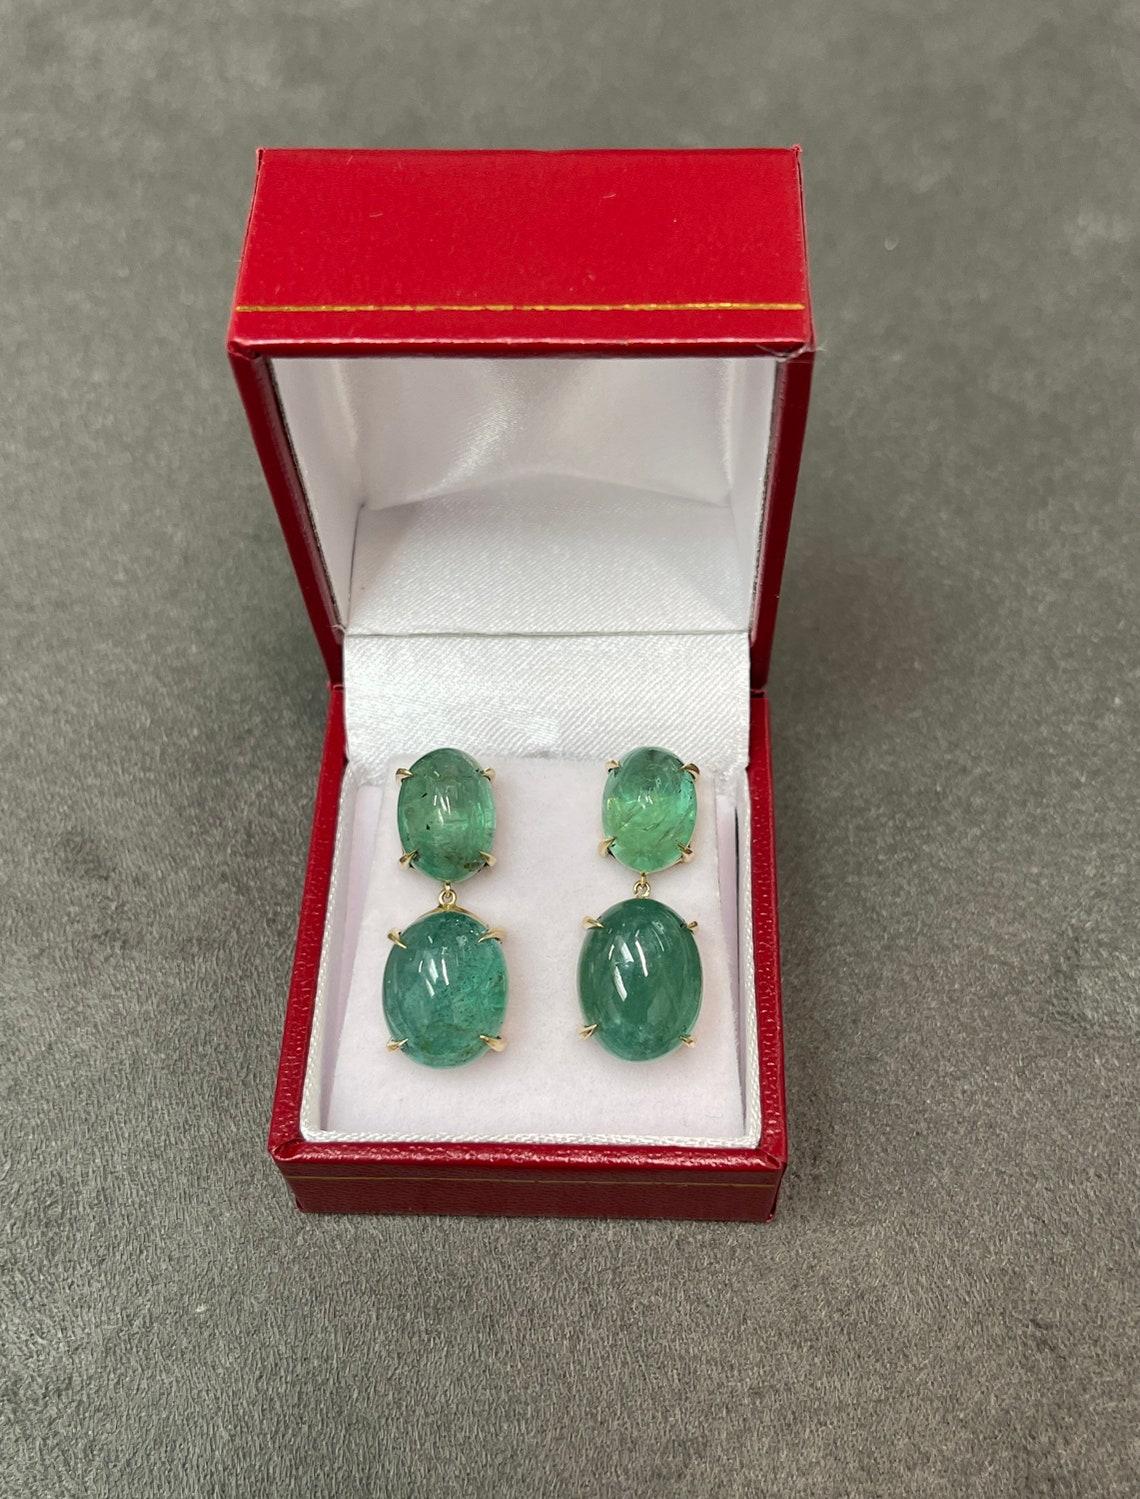 Large statement size Emerald dangling studs in fine 14K yellow gold. Displayed are medium-green oval cut emeralds with very good transparency, accented by a simple four-prong gold mount, allowing for the emeralds to be shown in full view. The